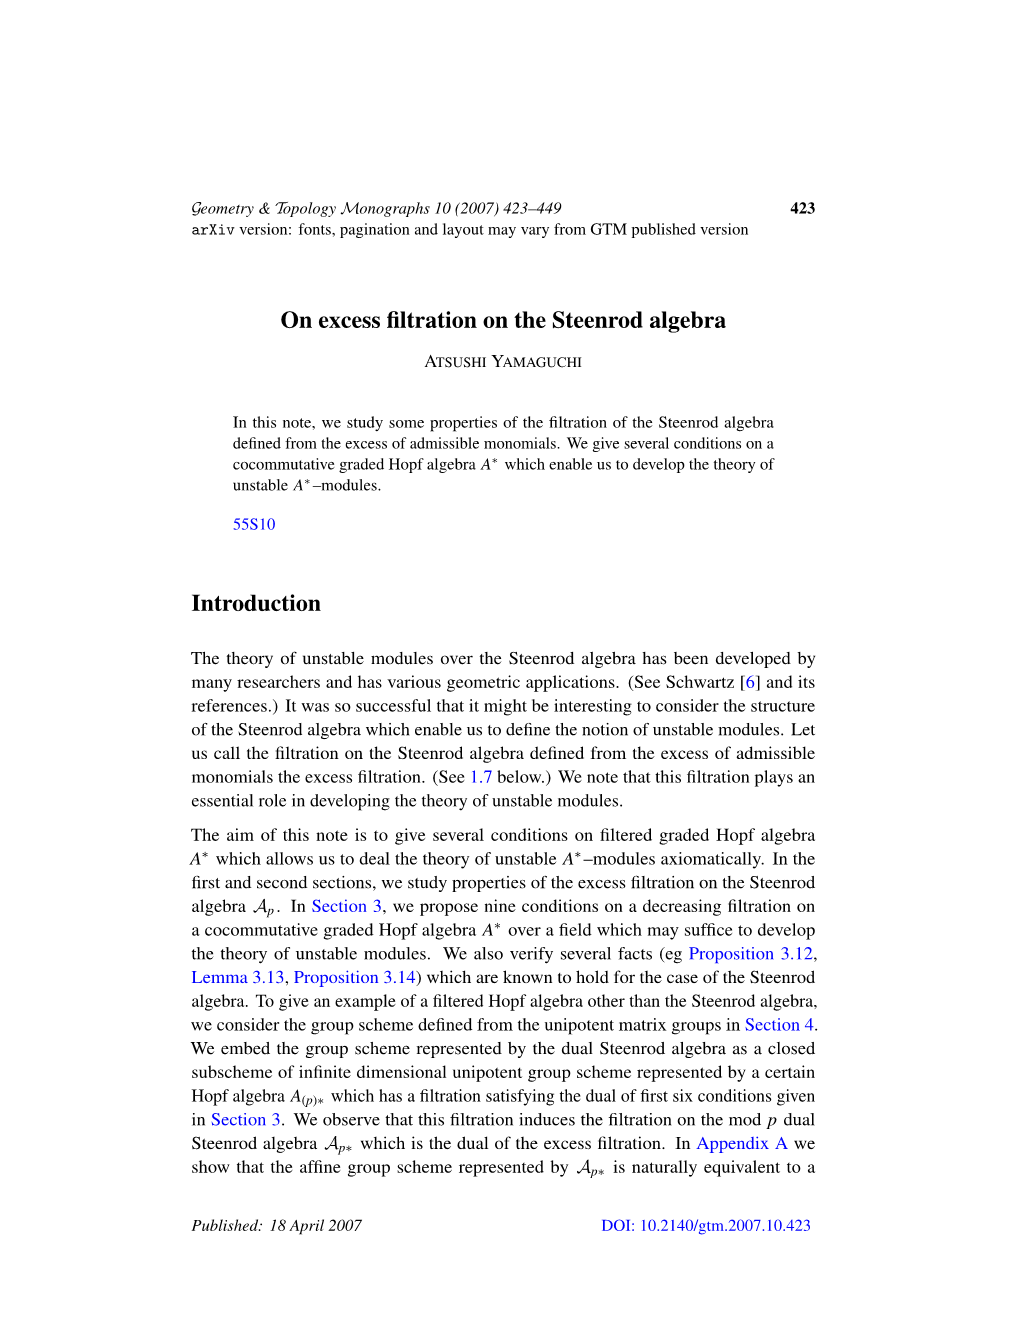 On Excess Filtration on the Steenrod Algebra Introduction